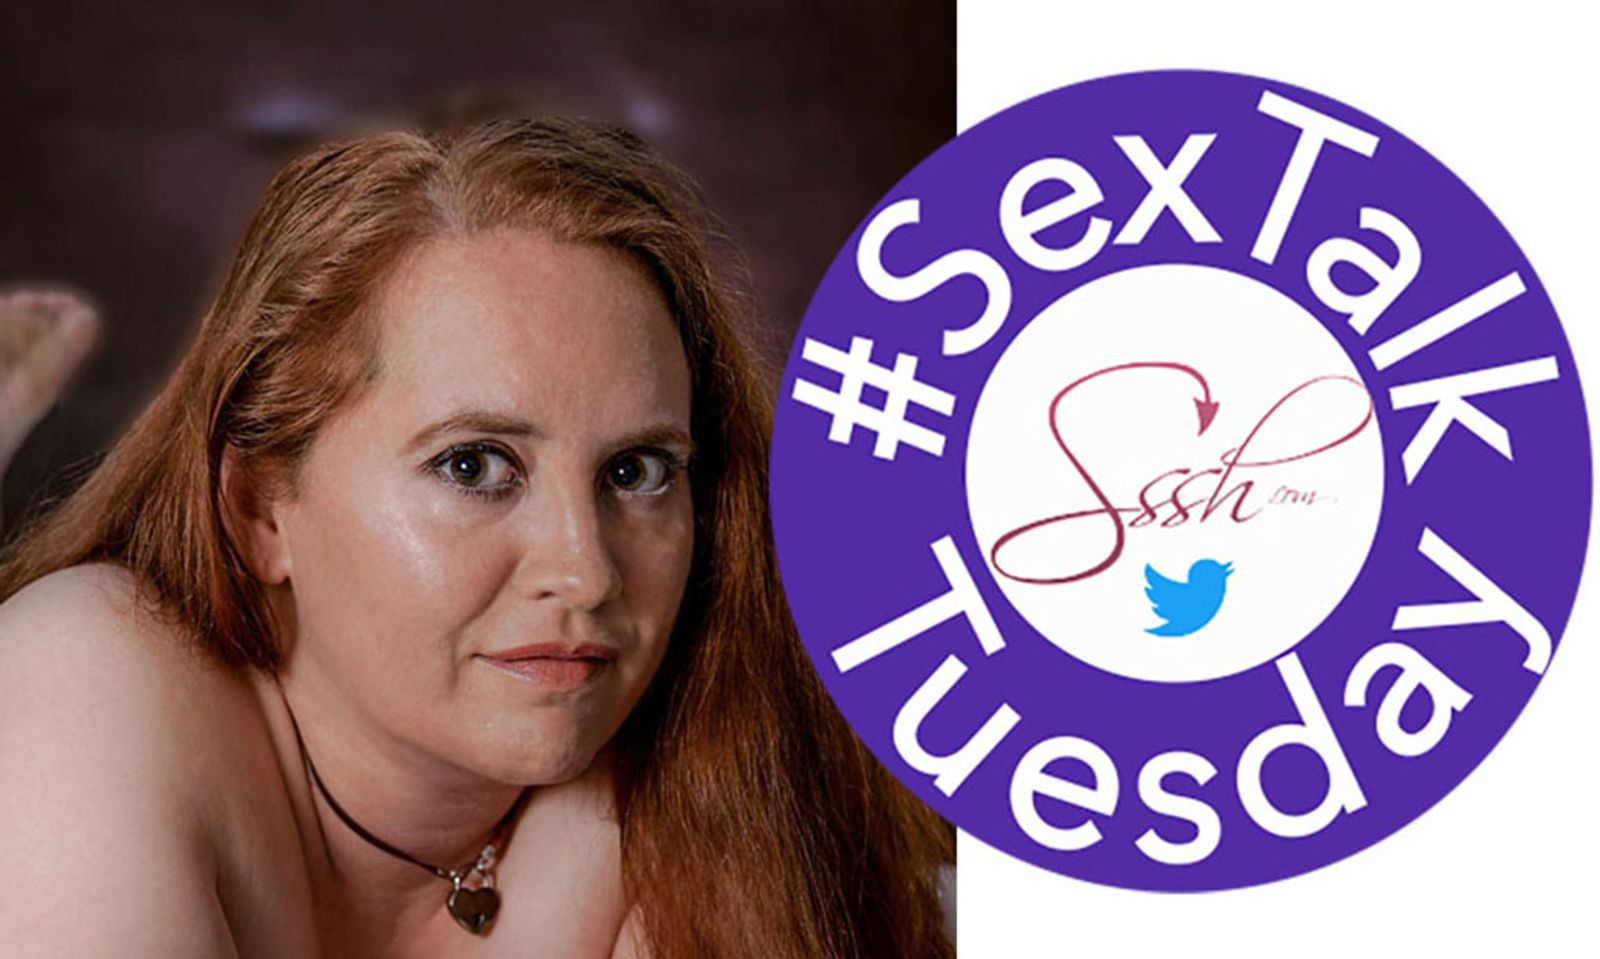 Lady Lyonene Is Special Guest Moderator For #SexTalkTuesday Today